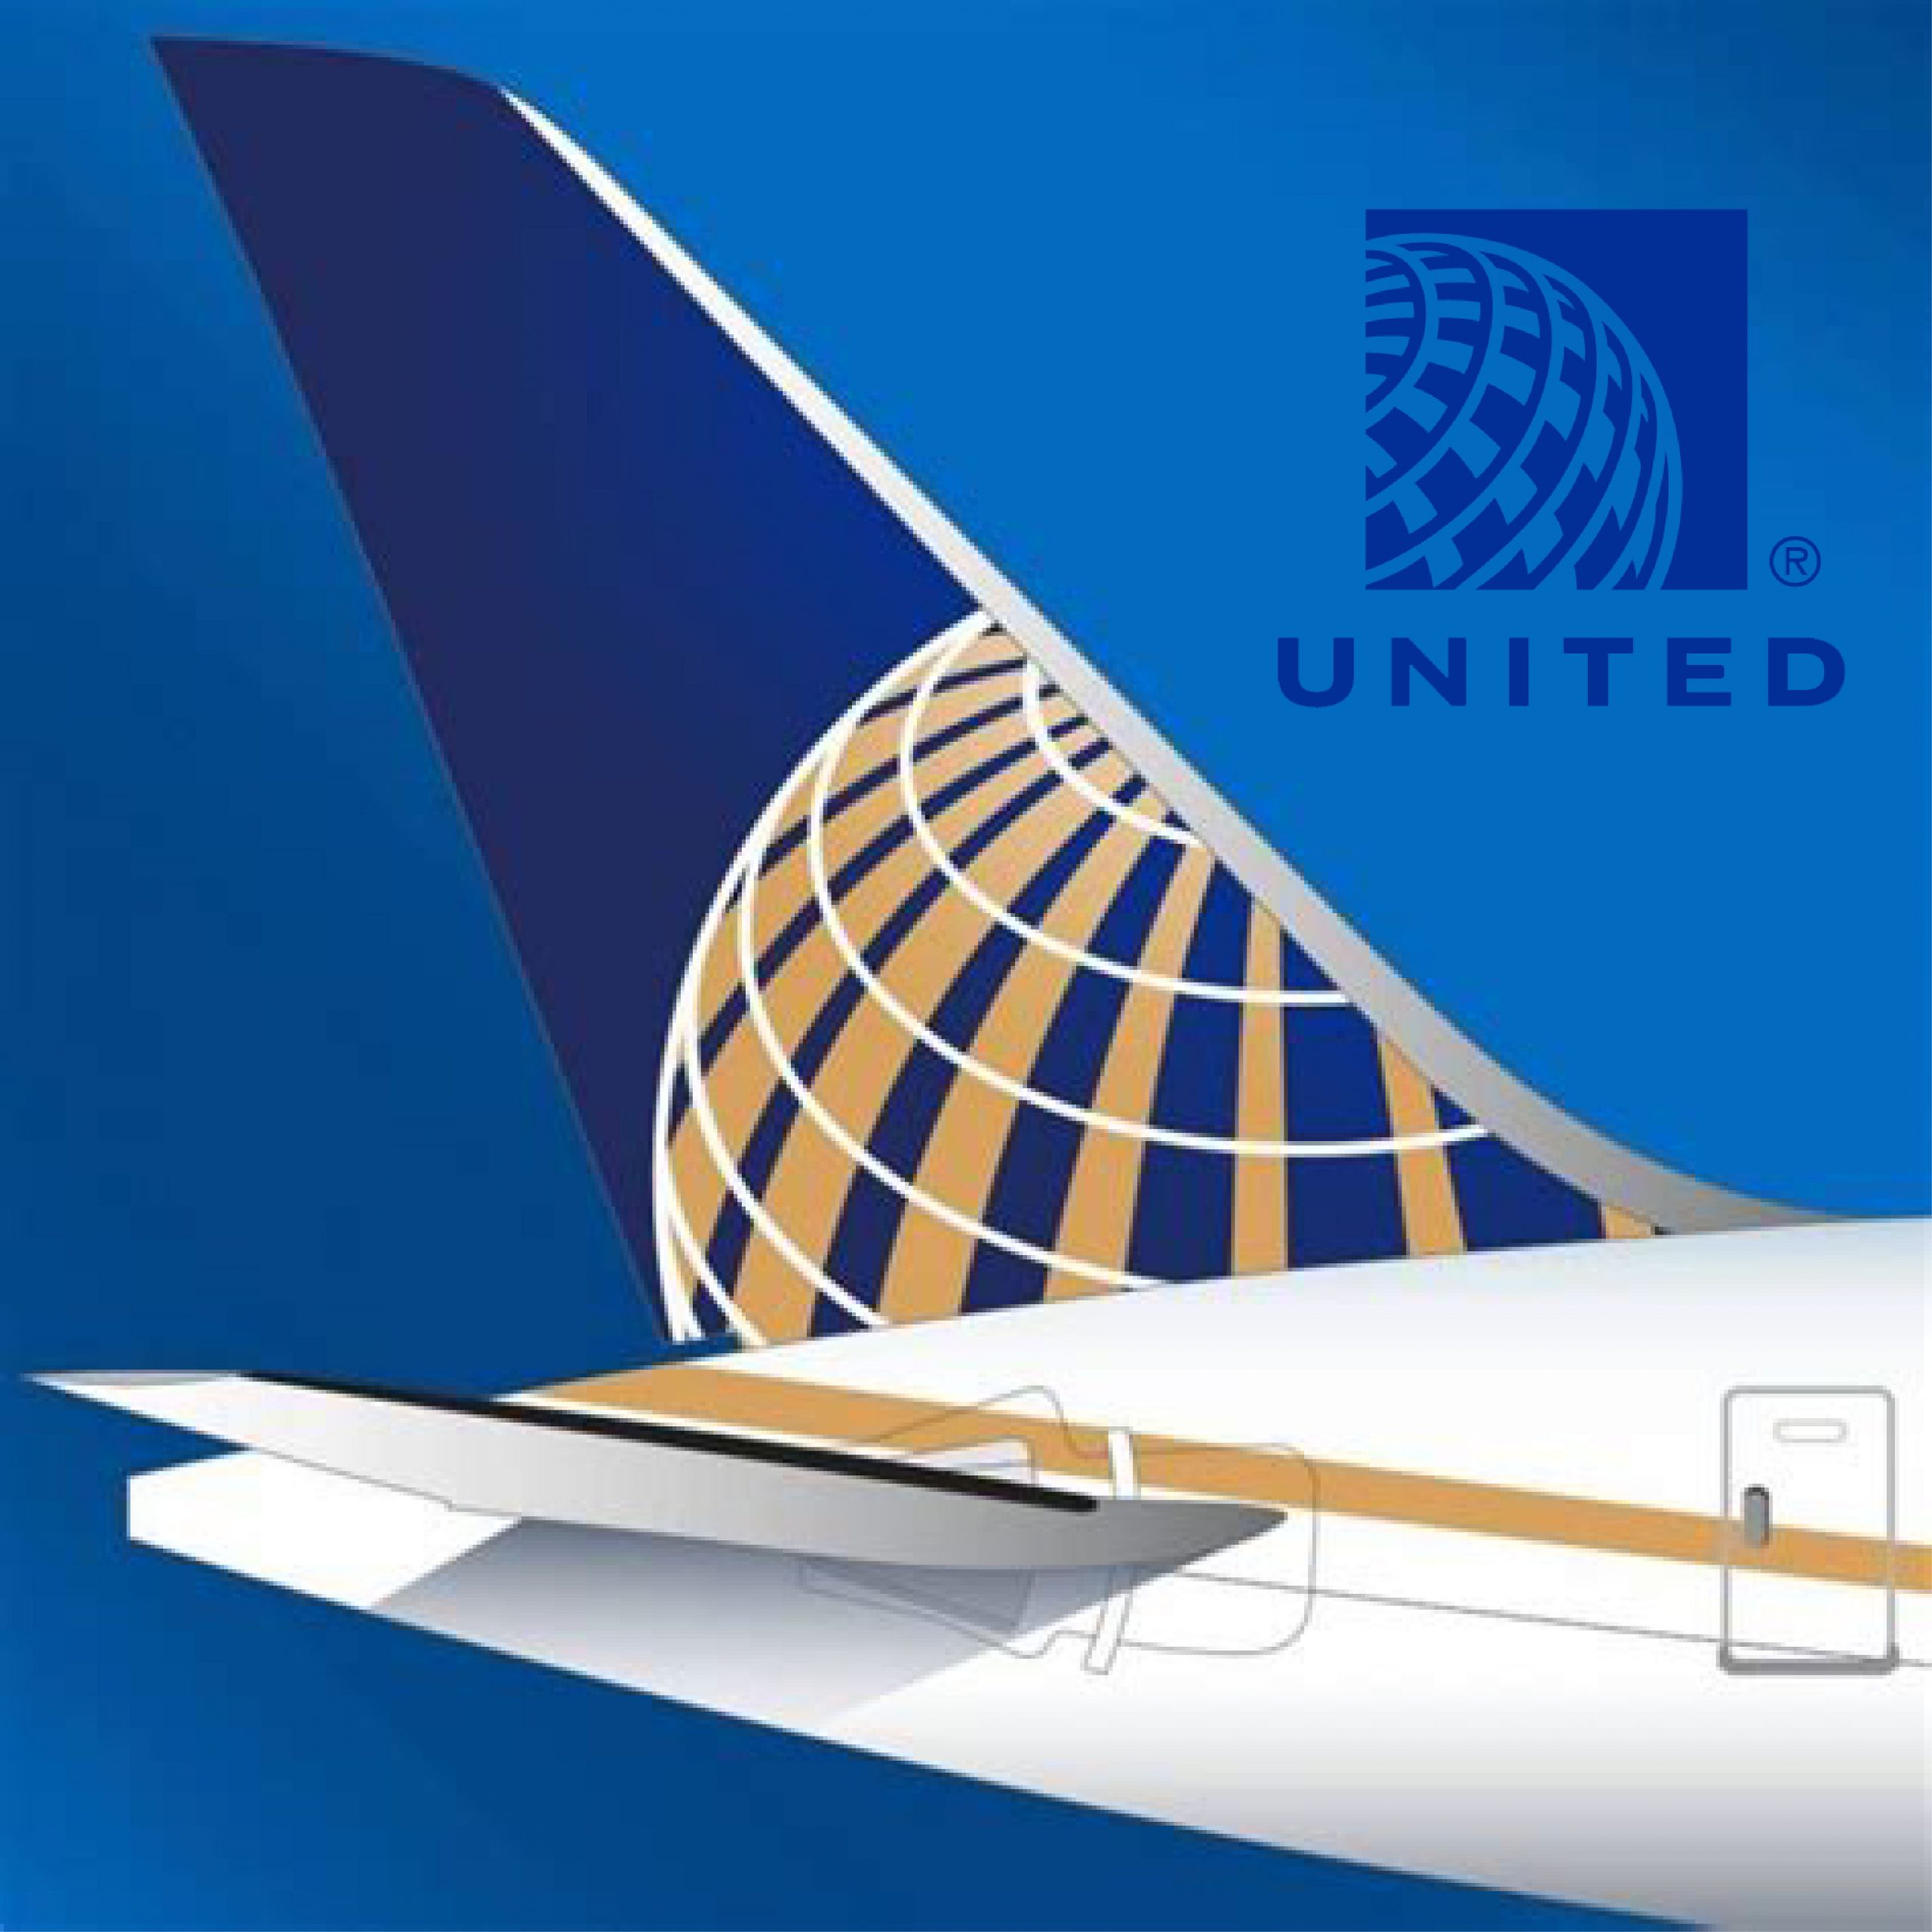 Ethical Case Study: United Airlines & Overbooking